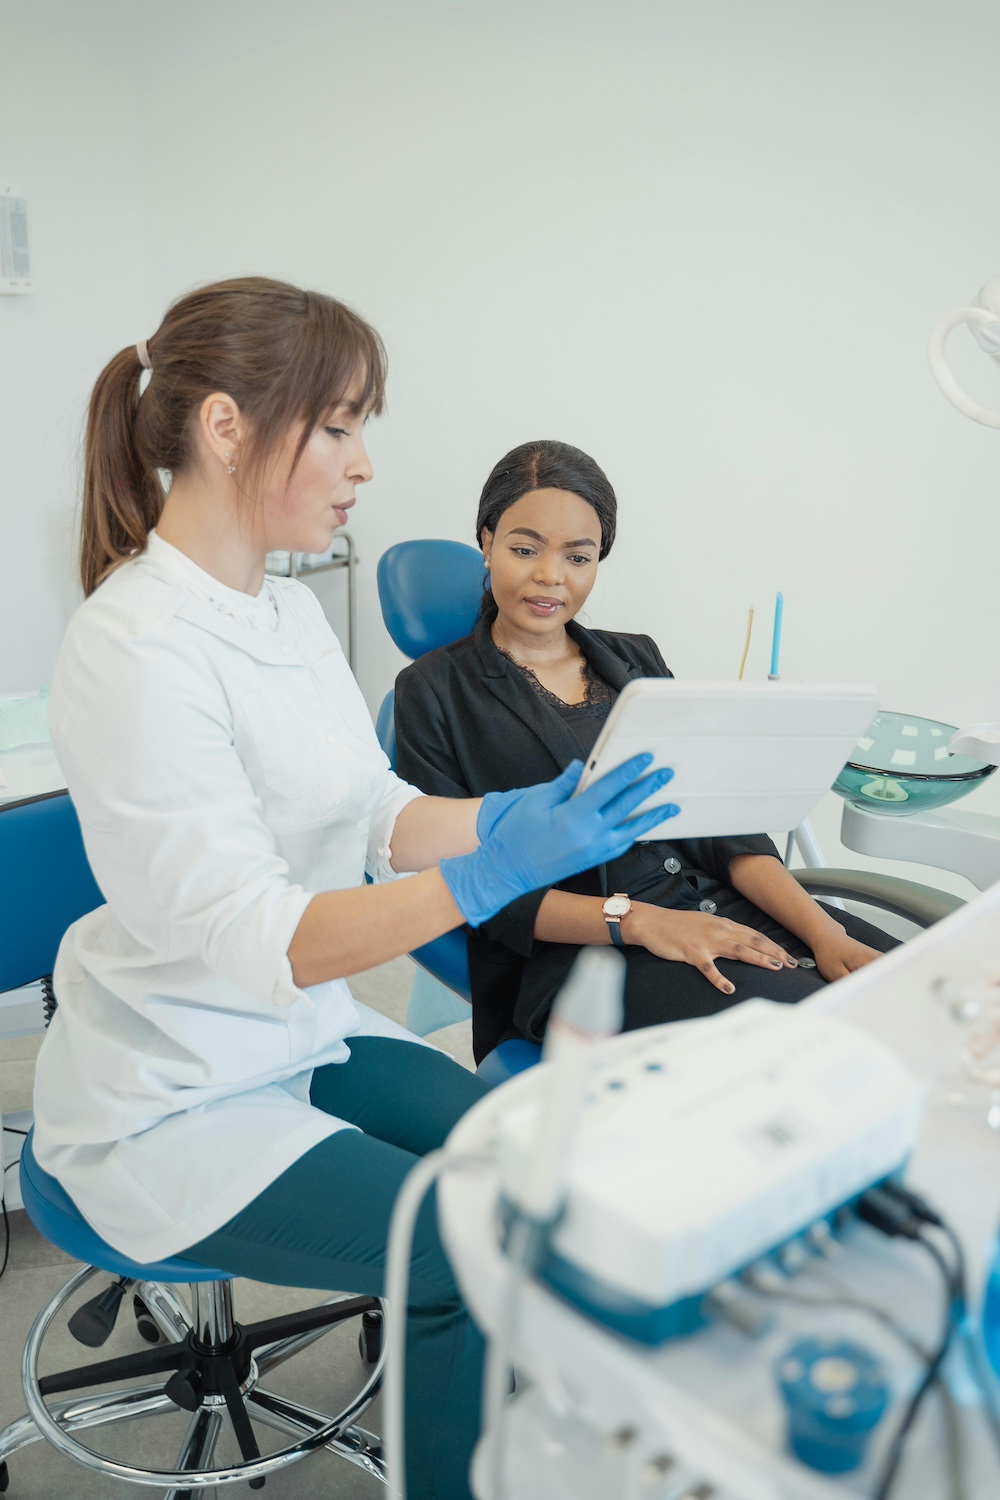 woman consulting with dentist about dental procedure looks at an ipad as dentist points